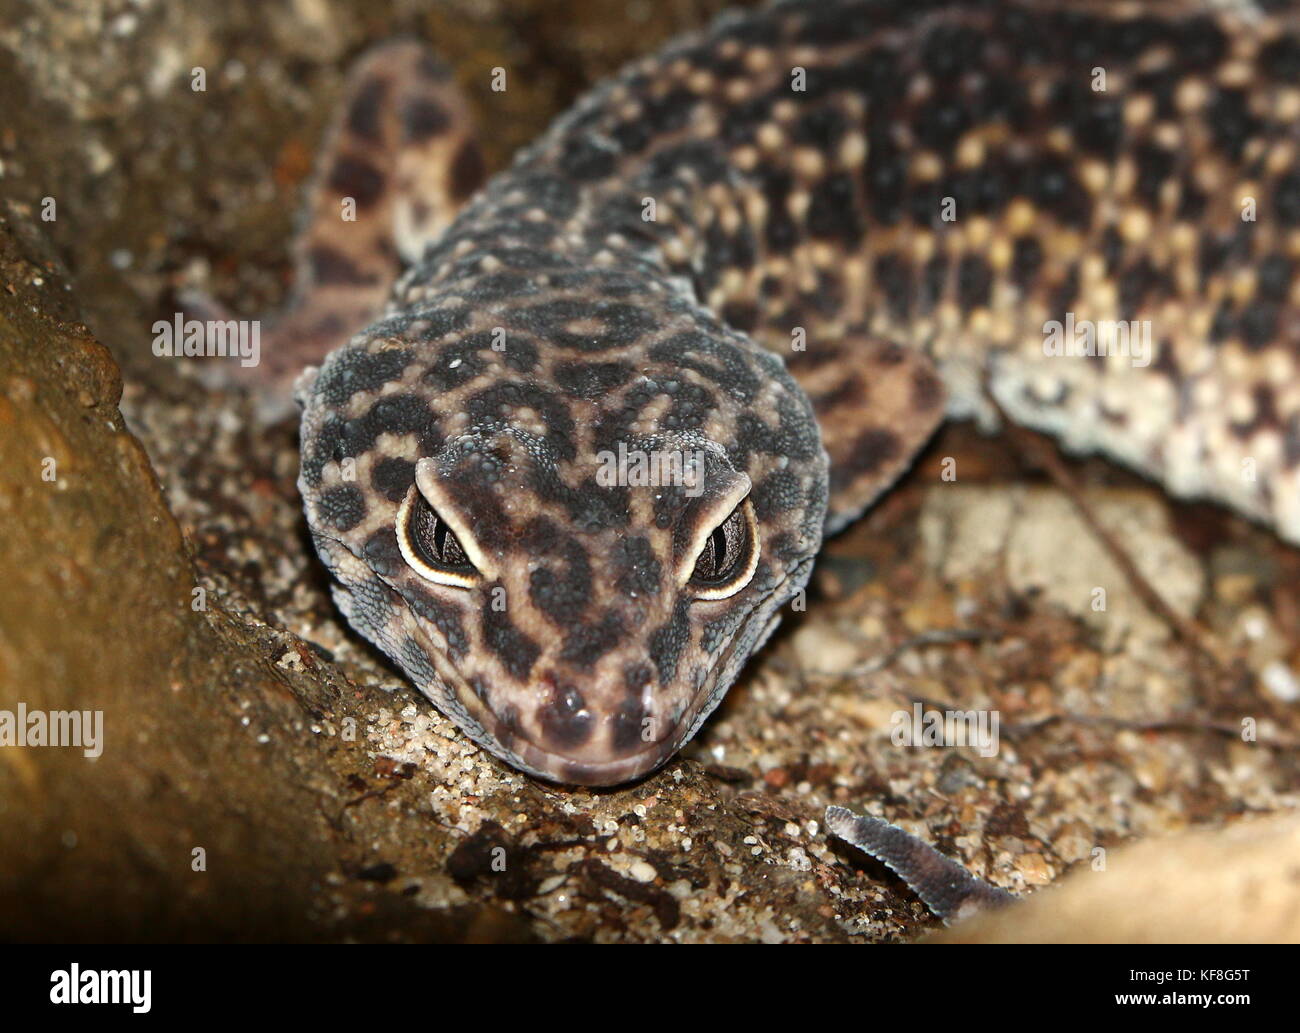 Closeup of the head of an Asian  Leopard gecko (Eublepharis macularius), found in Pakistan and India. Stock Photo